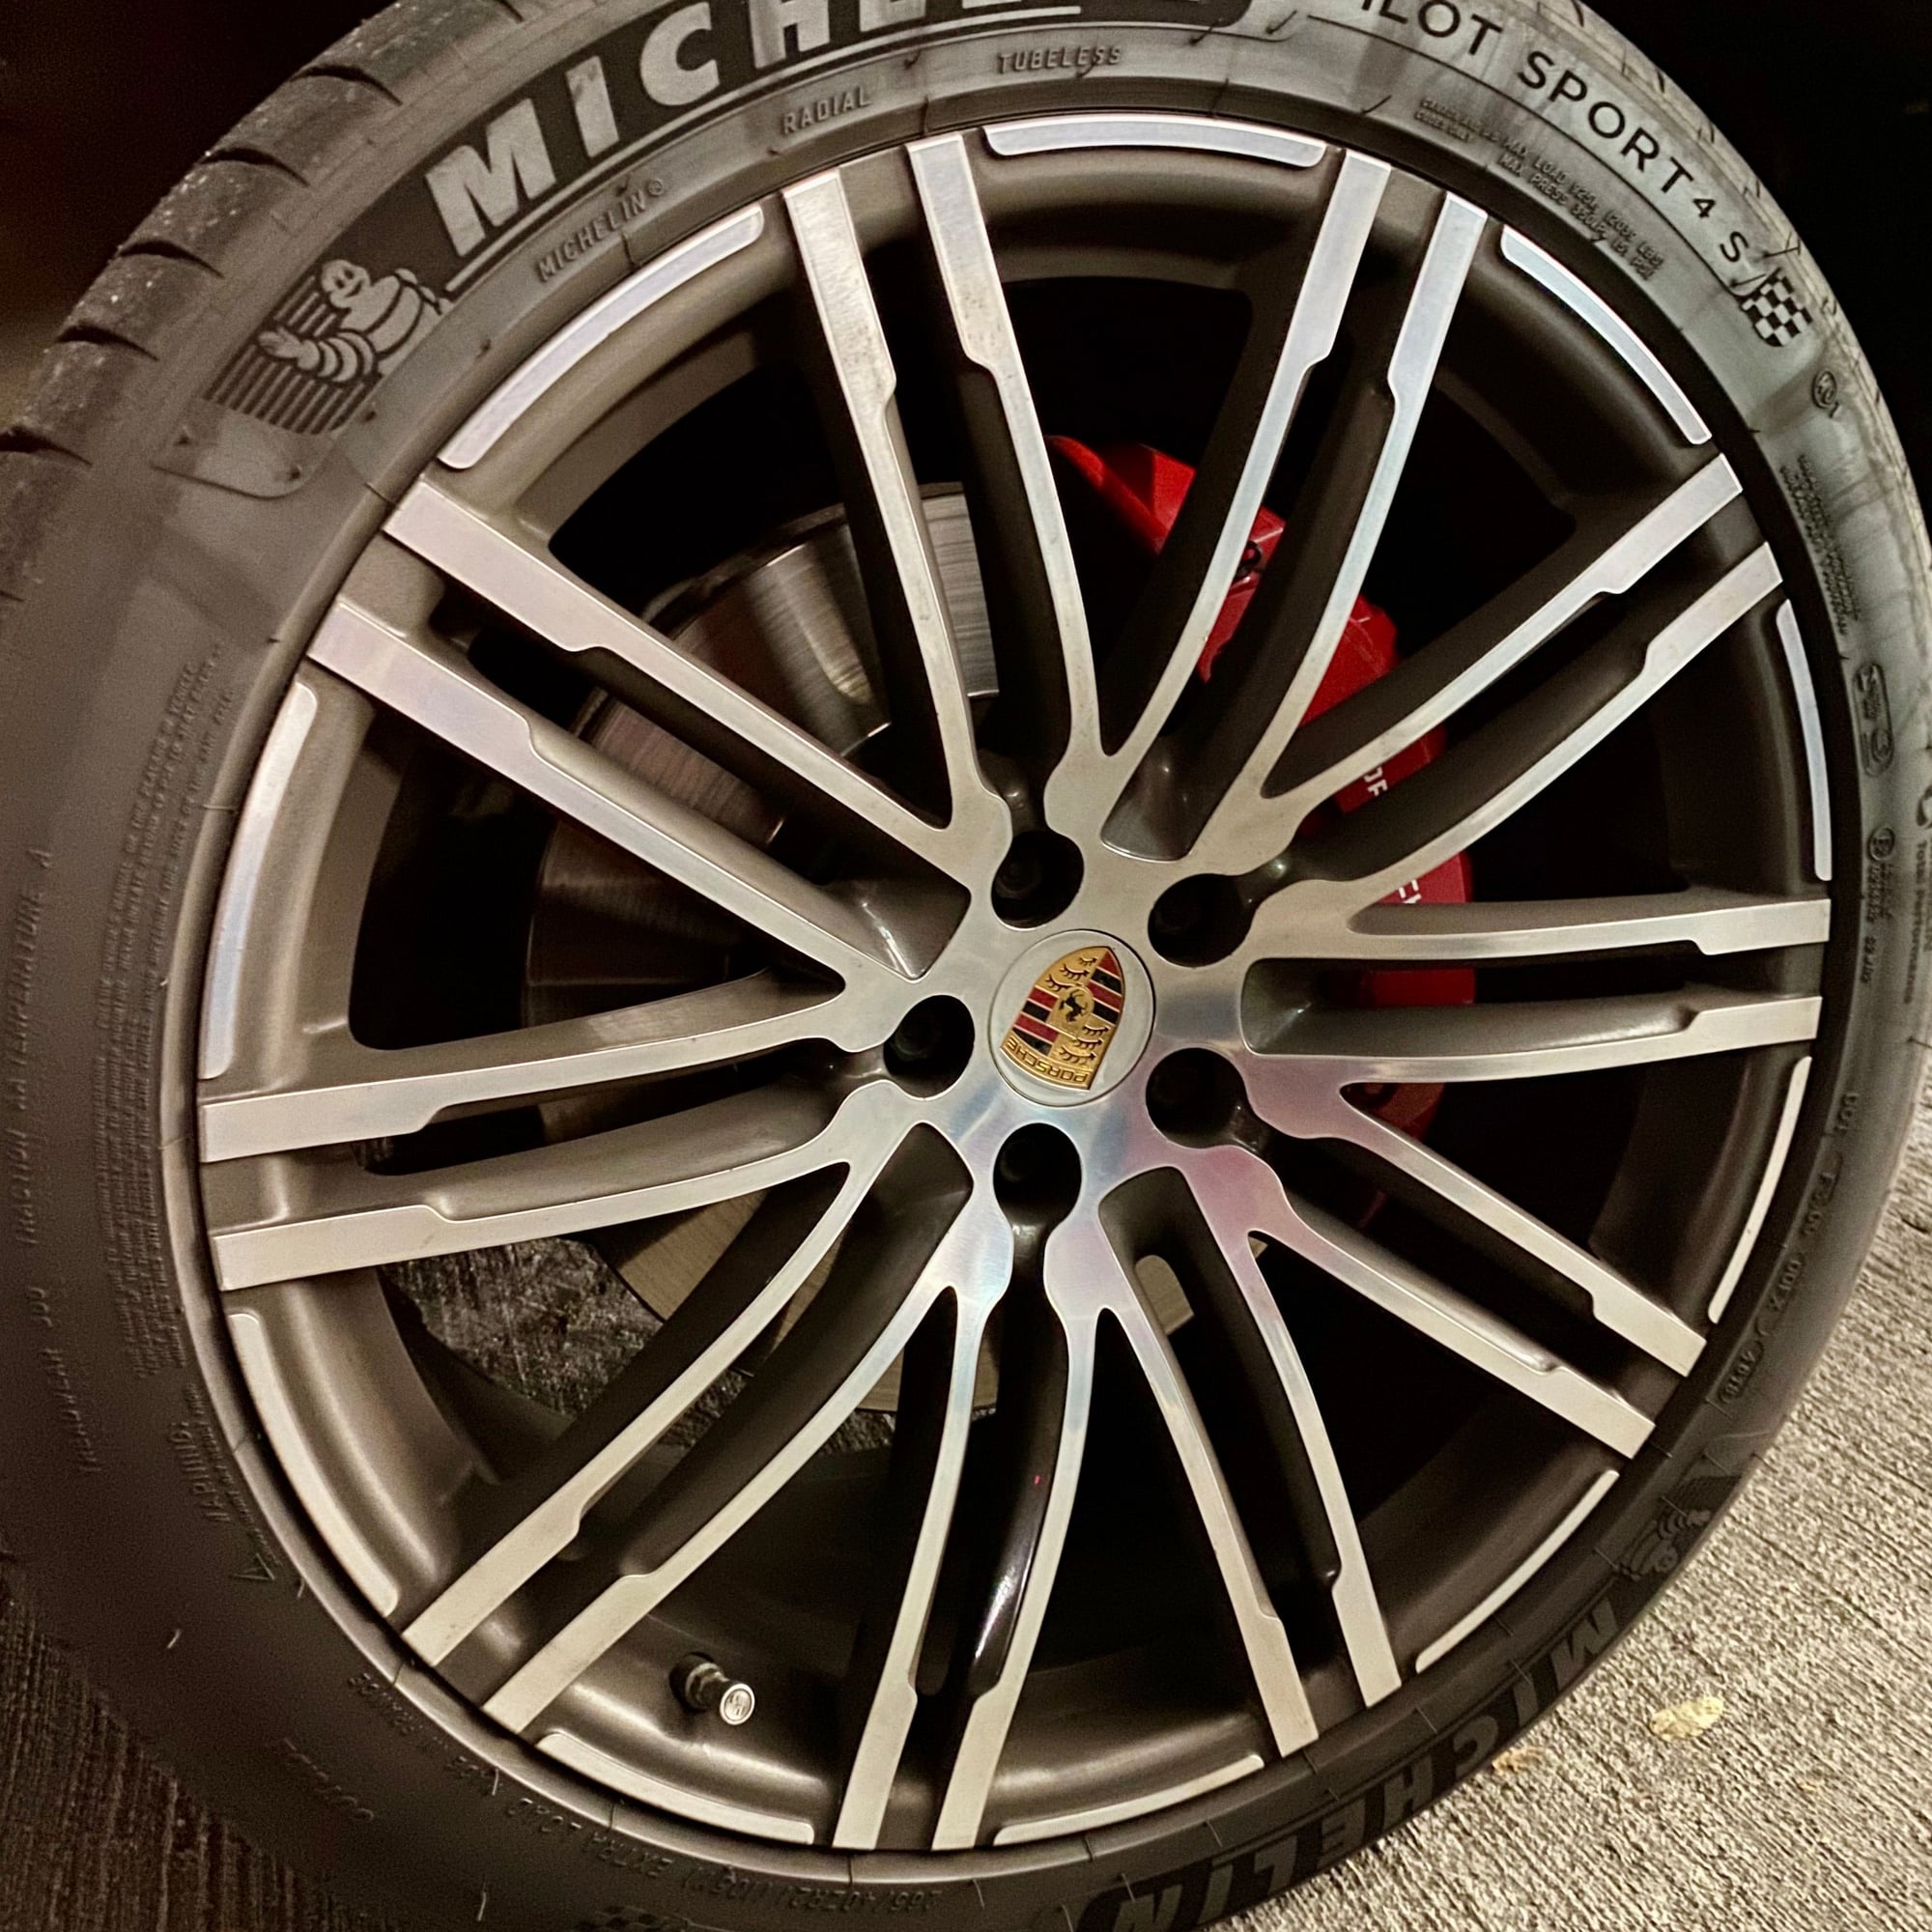 Wheels and Tires/Axles - OEM PORSCHE MACAN 21" TURBO STYLE RIMS WITH RECENT CERAMIC PRO COATING LIKE NEW - Used - 2015 to 2020 Porsche Macan - Boston, MA 02215, United States